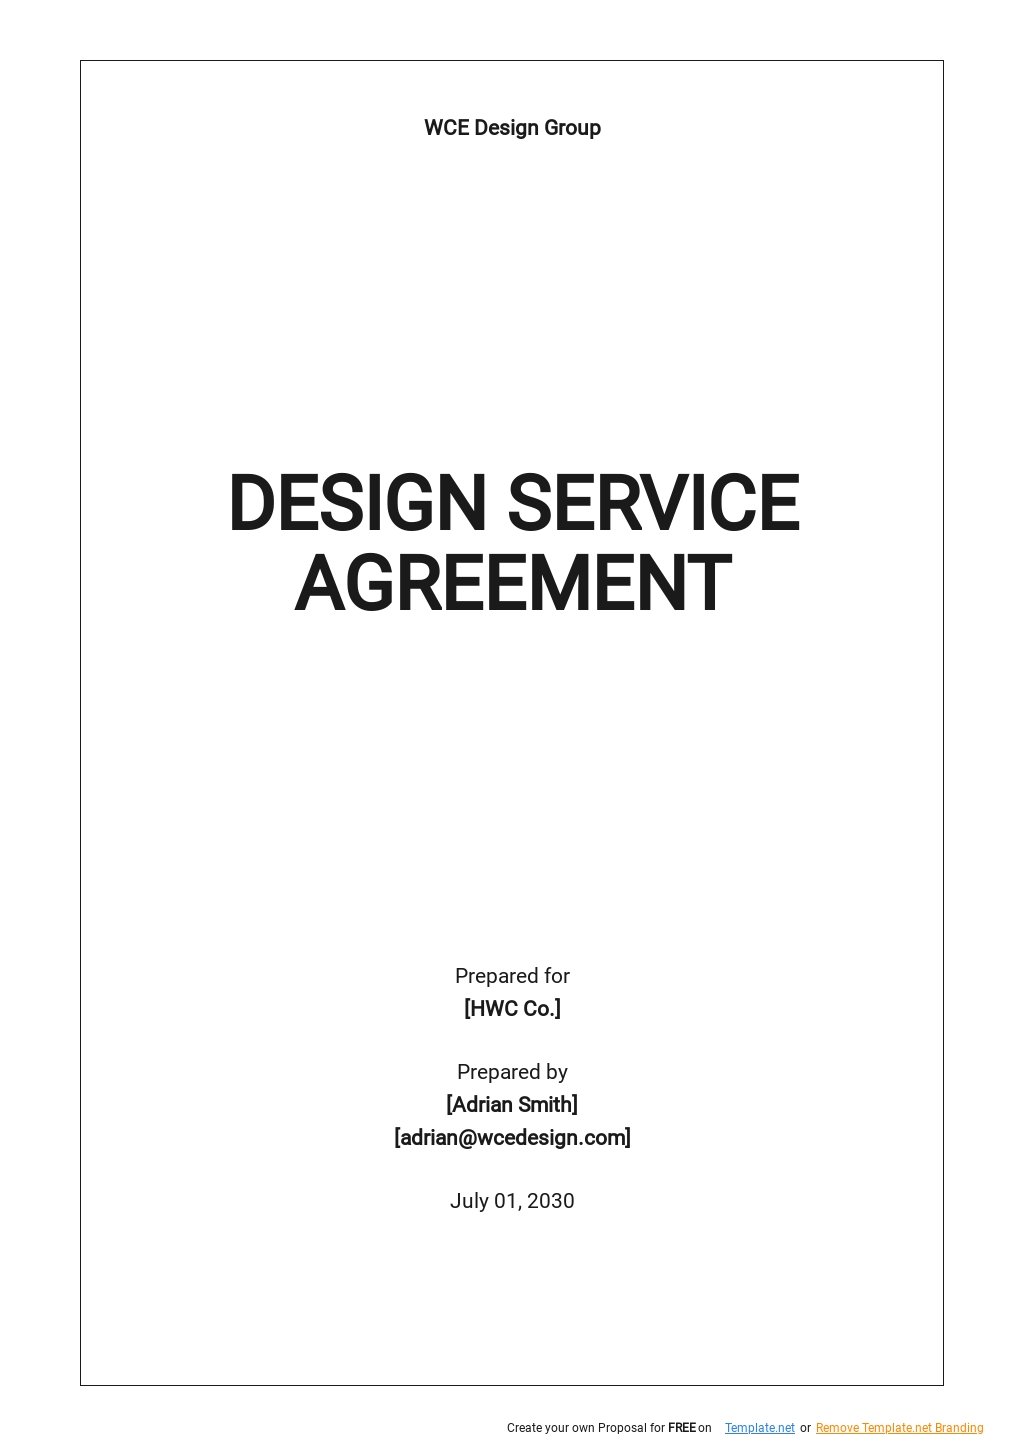 Design Service Agreement Template Google Docs, Word, Apple Pages